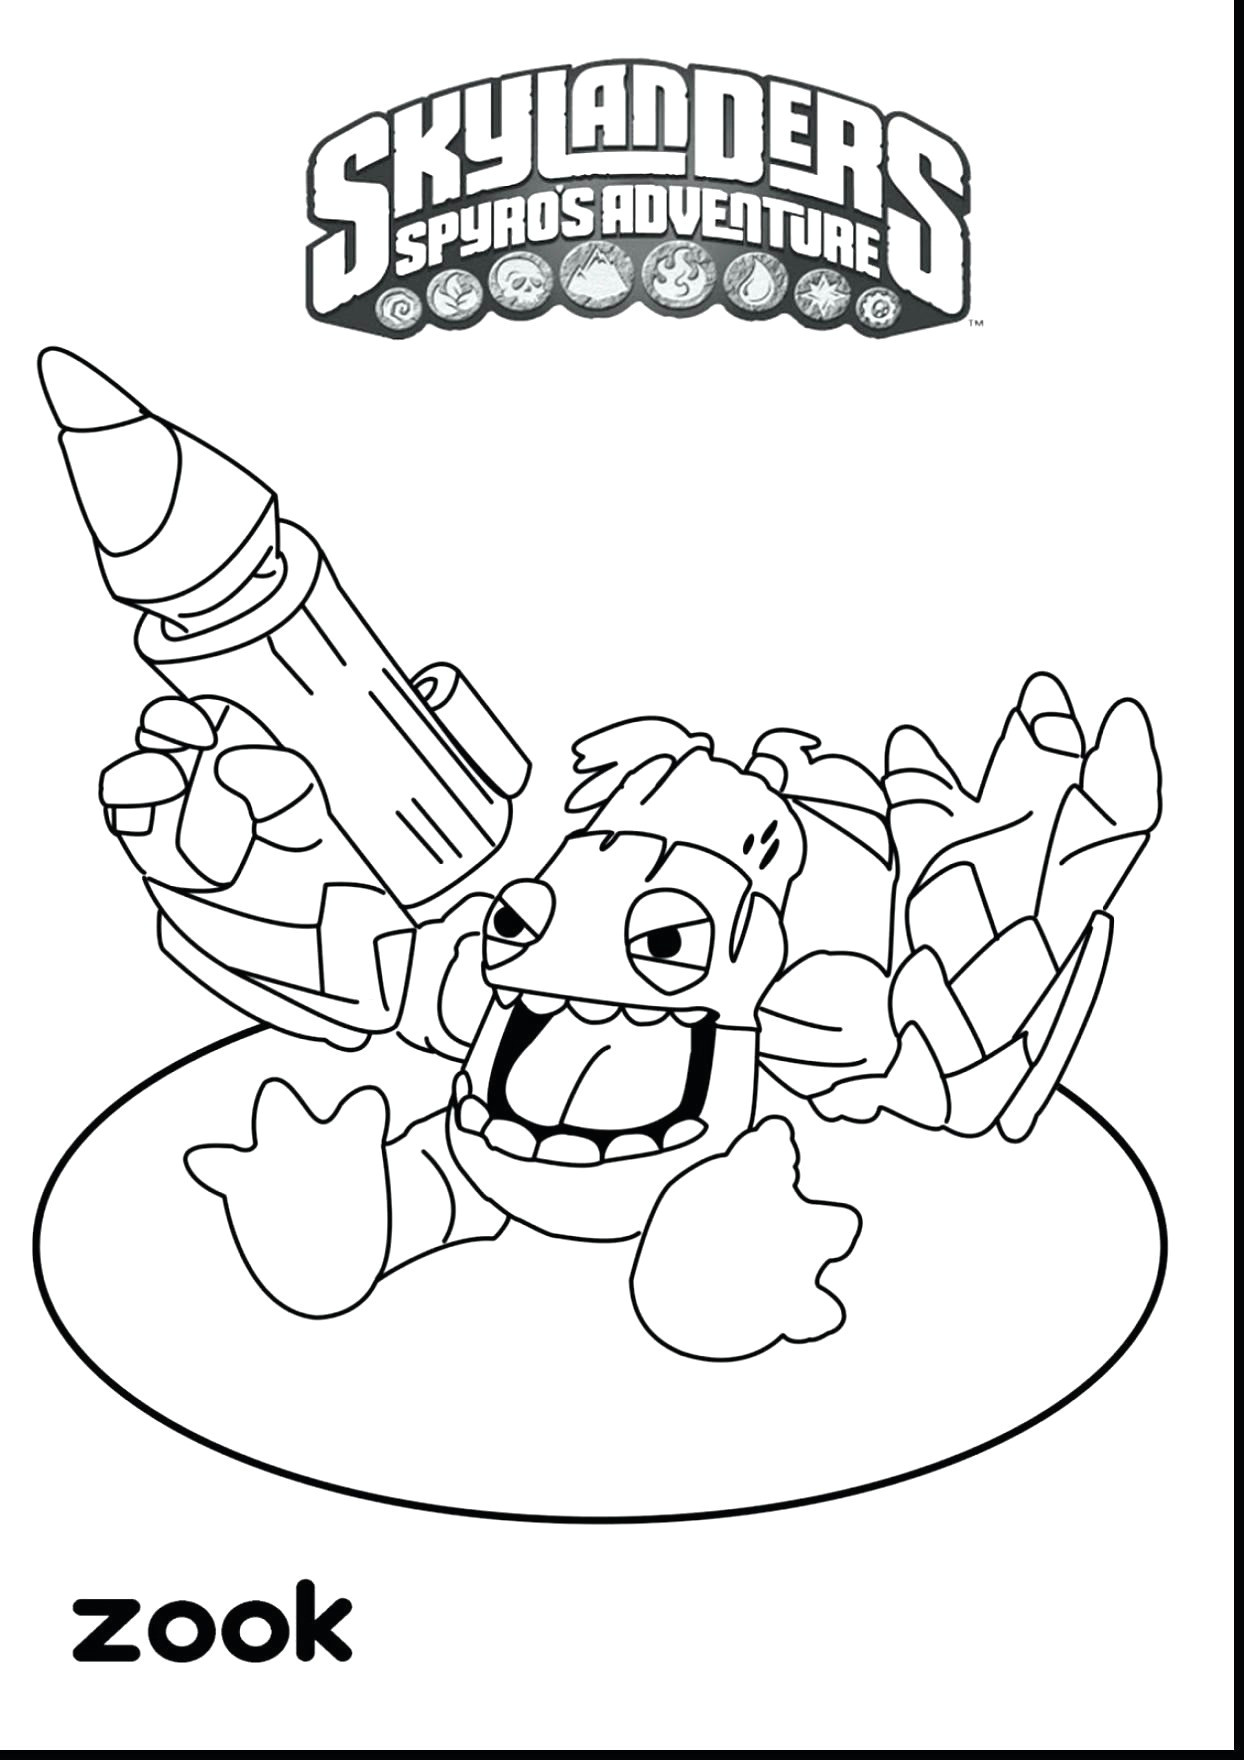 Drawing Human Cartoons Www Colouring Pages Brilliant Easy to Draw Instruments Home Coloring